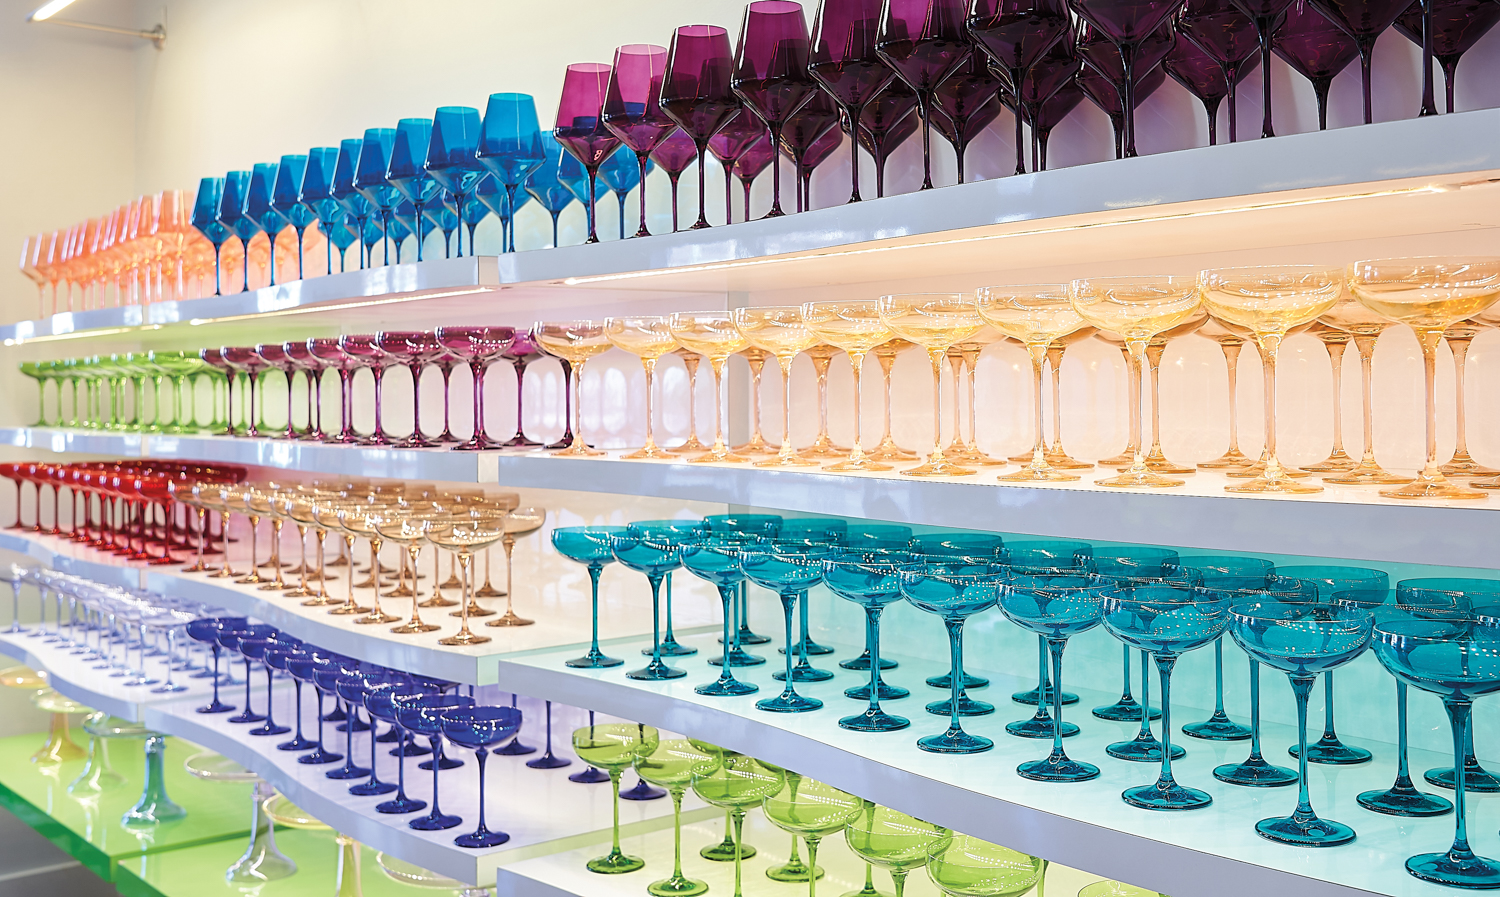 colorful glassware on shelves